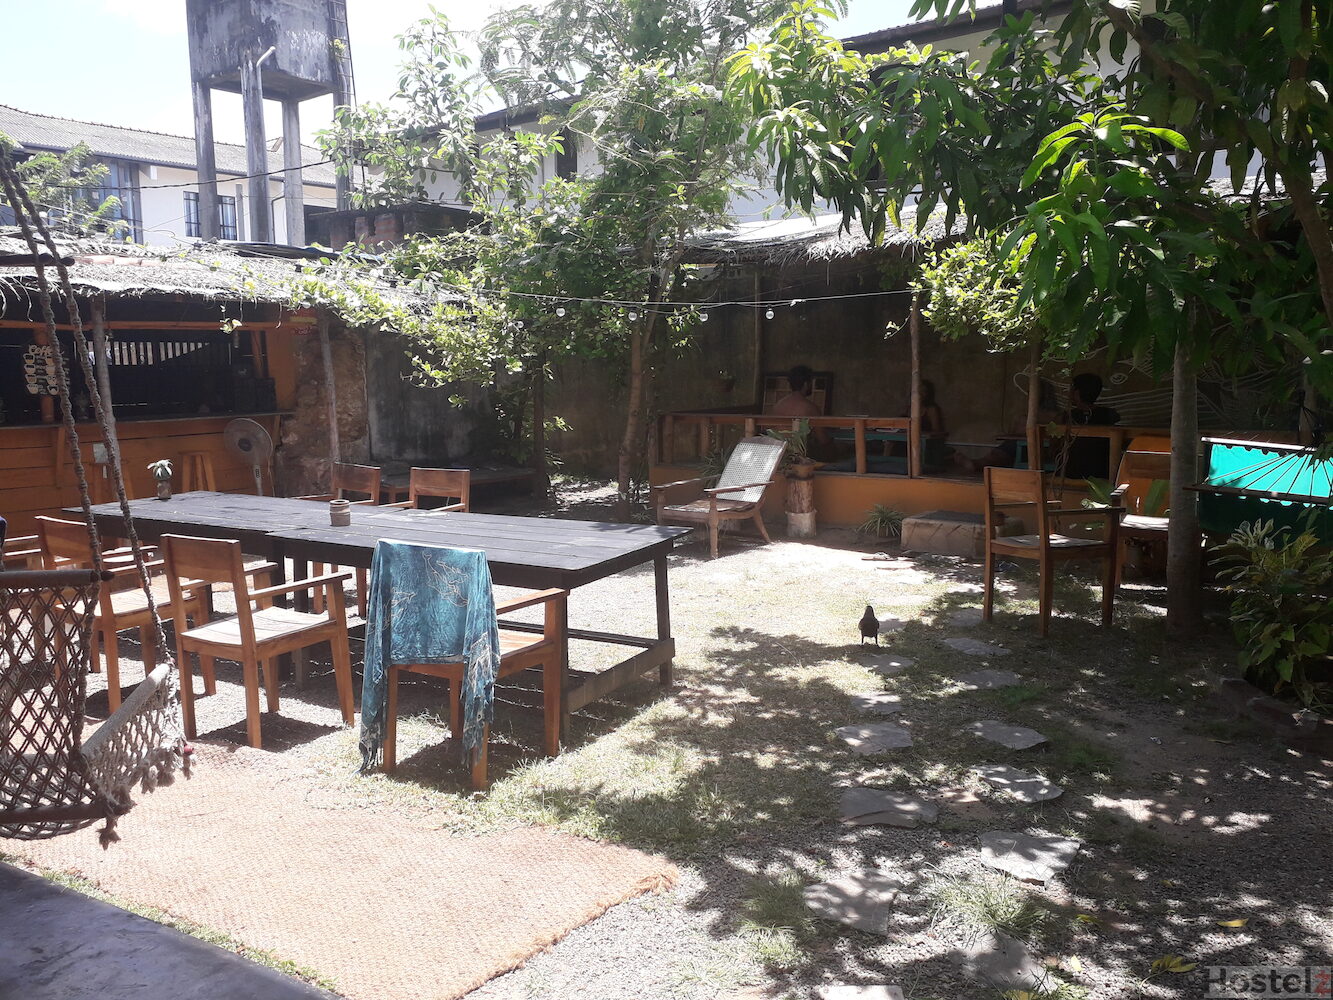 Plan B Coliving & Coworking, Weligama